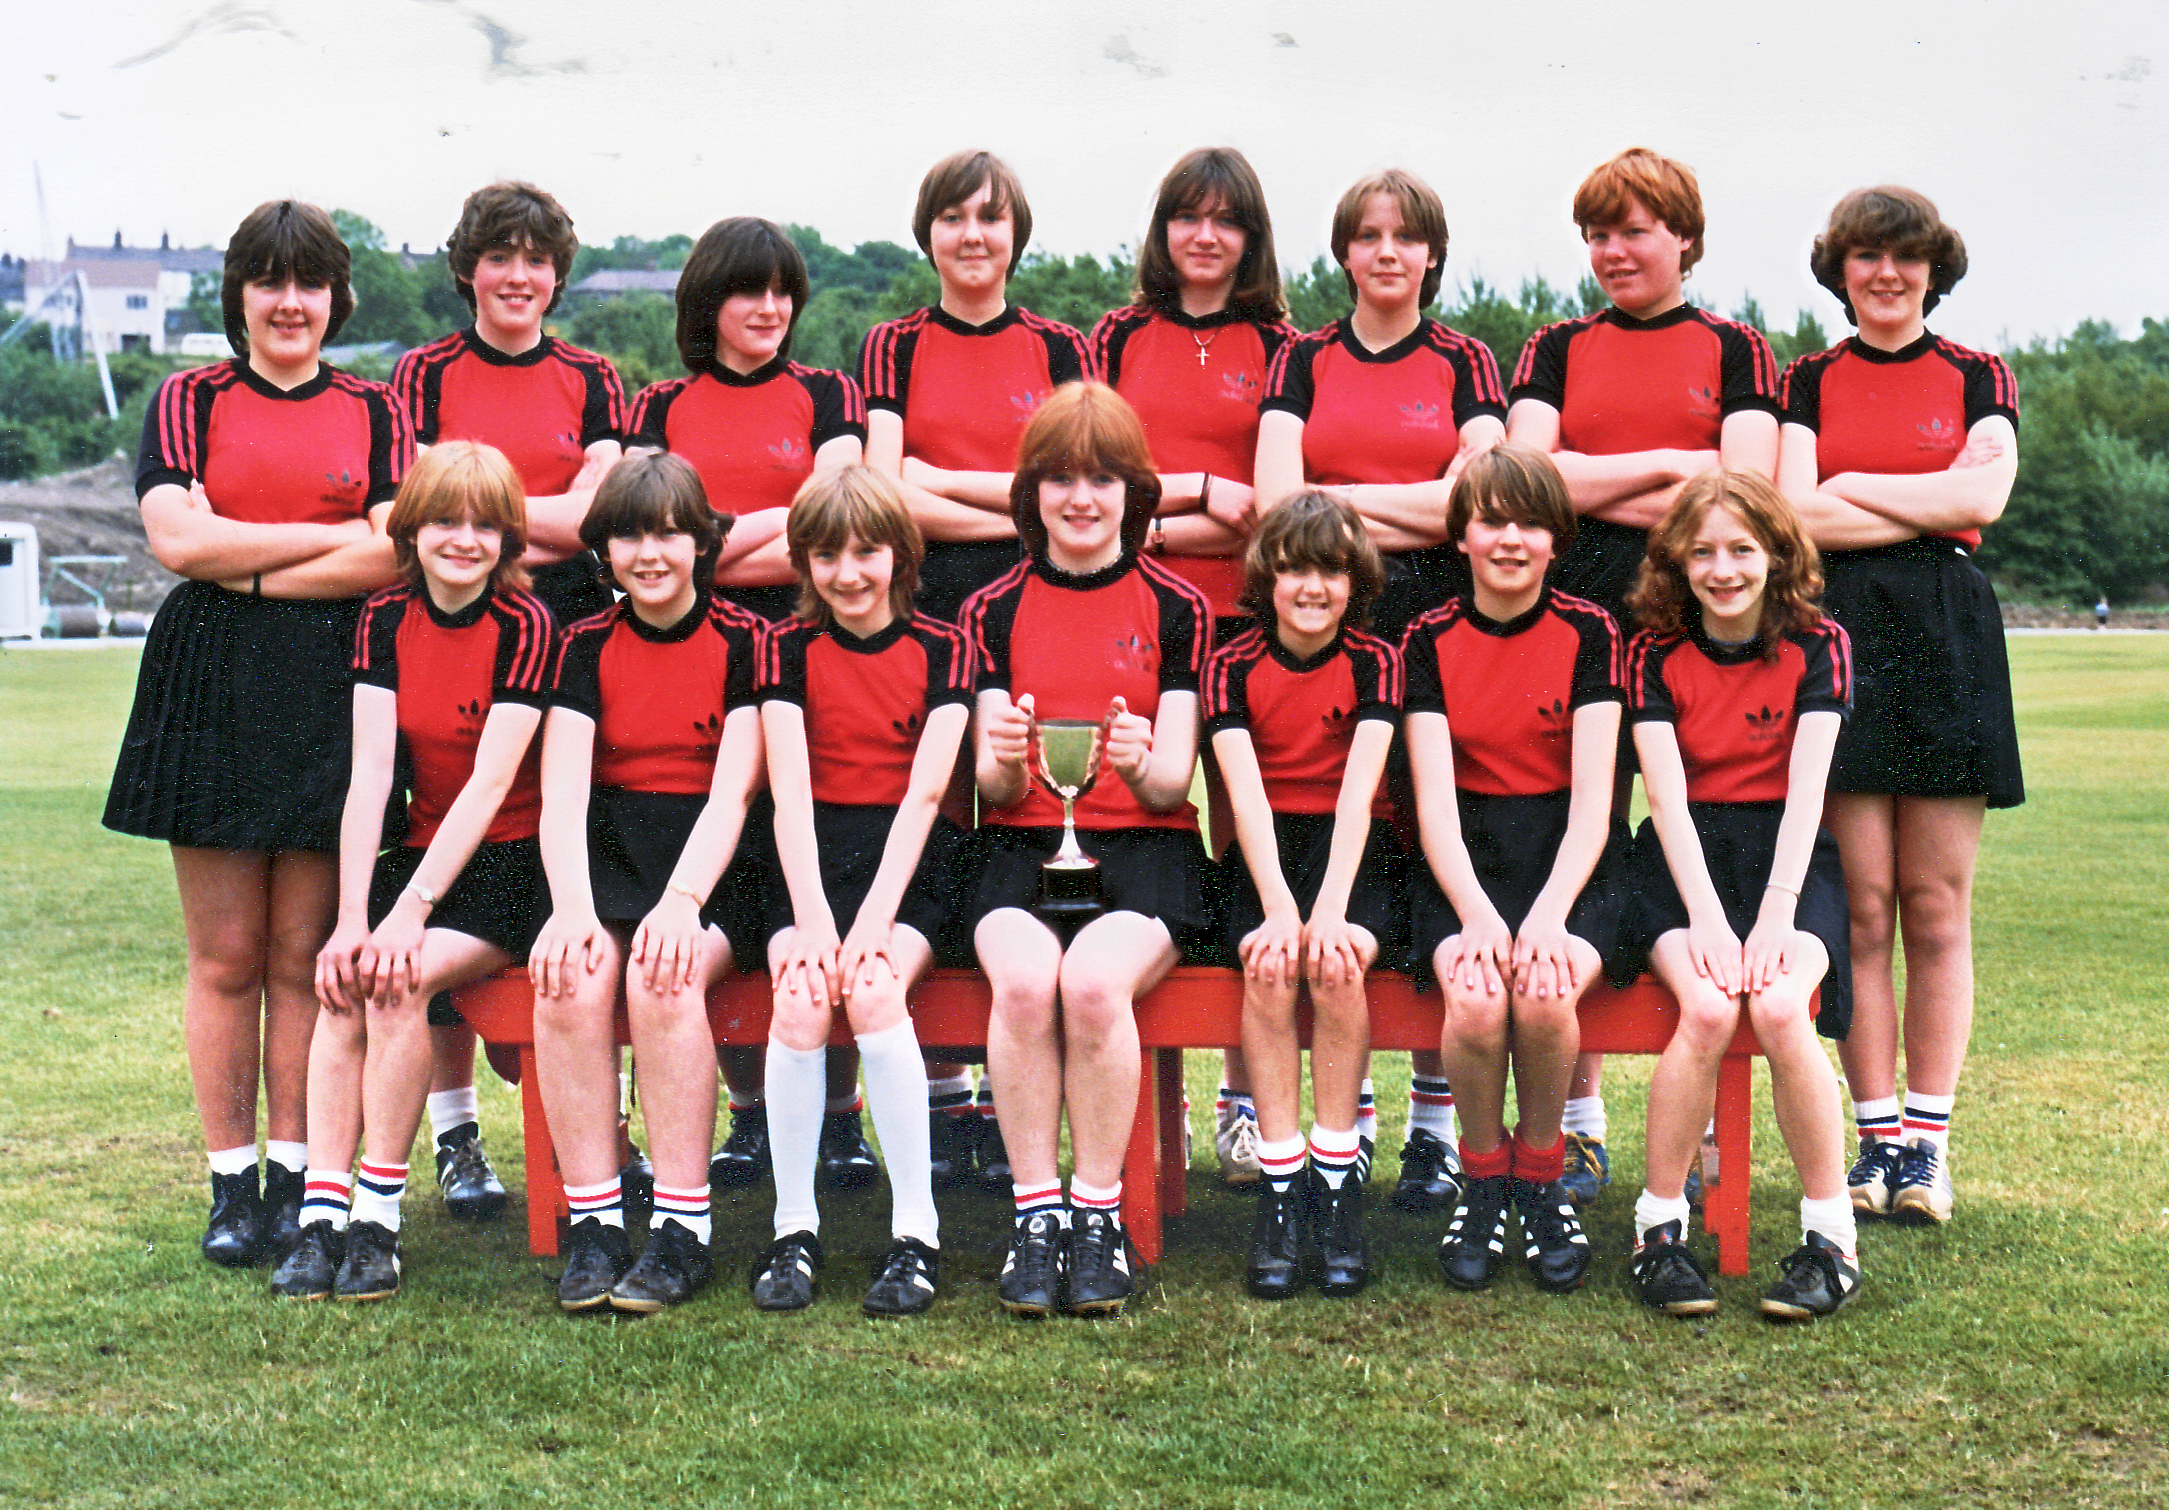 Rounders club formed by chance in 1967 celebrates 50th anniversary